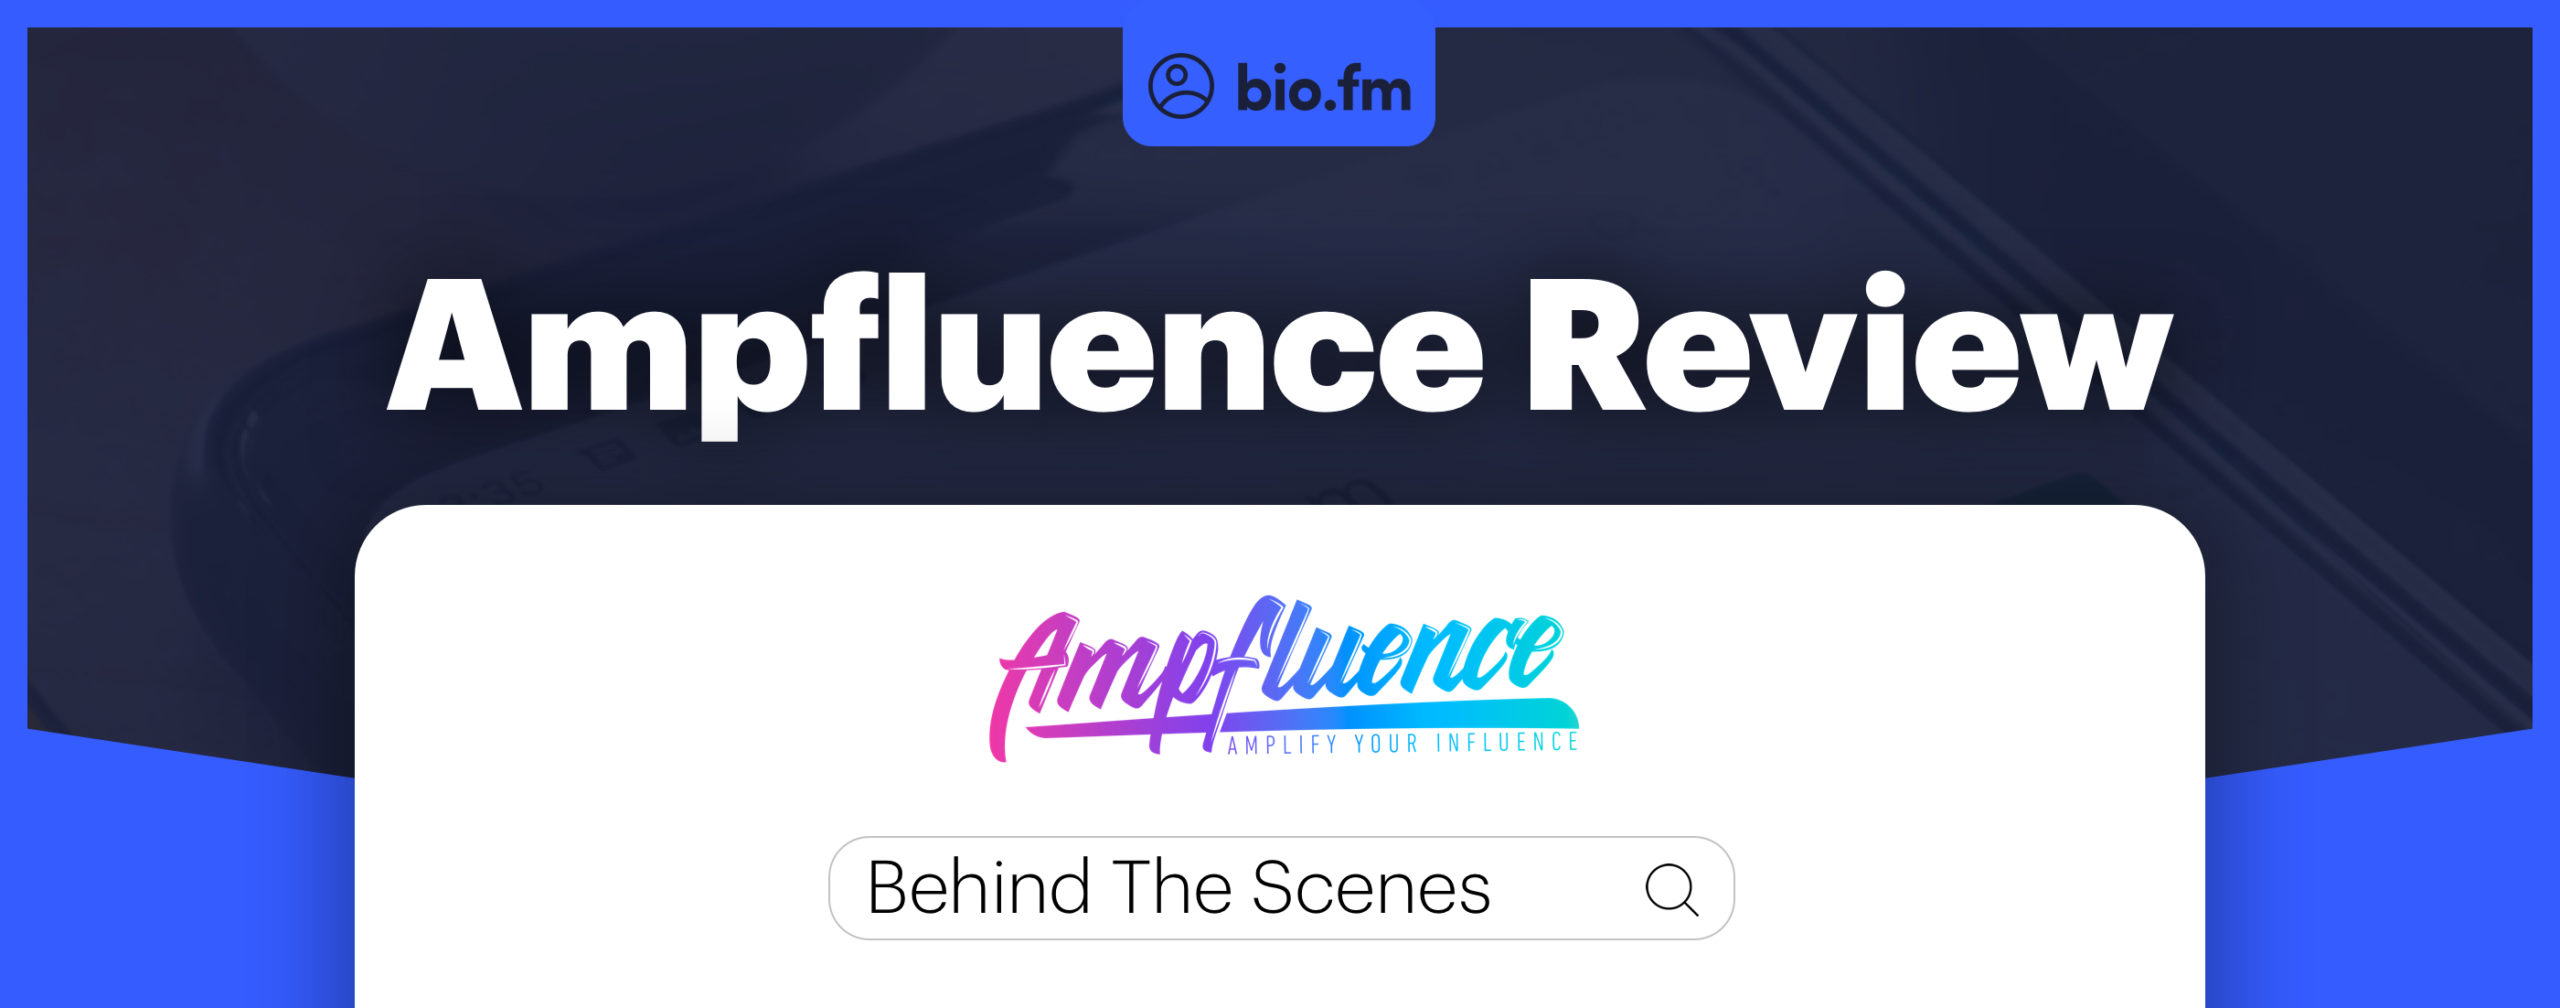 amfluence review featured image